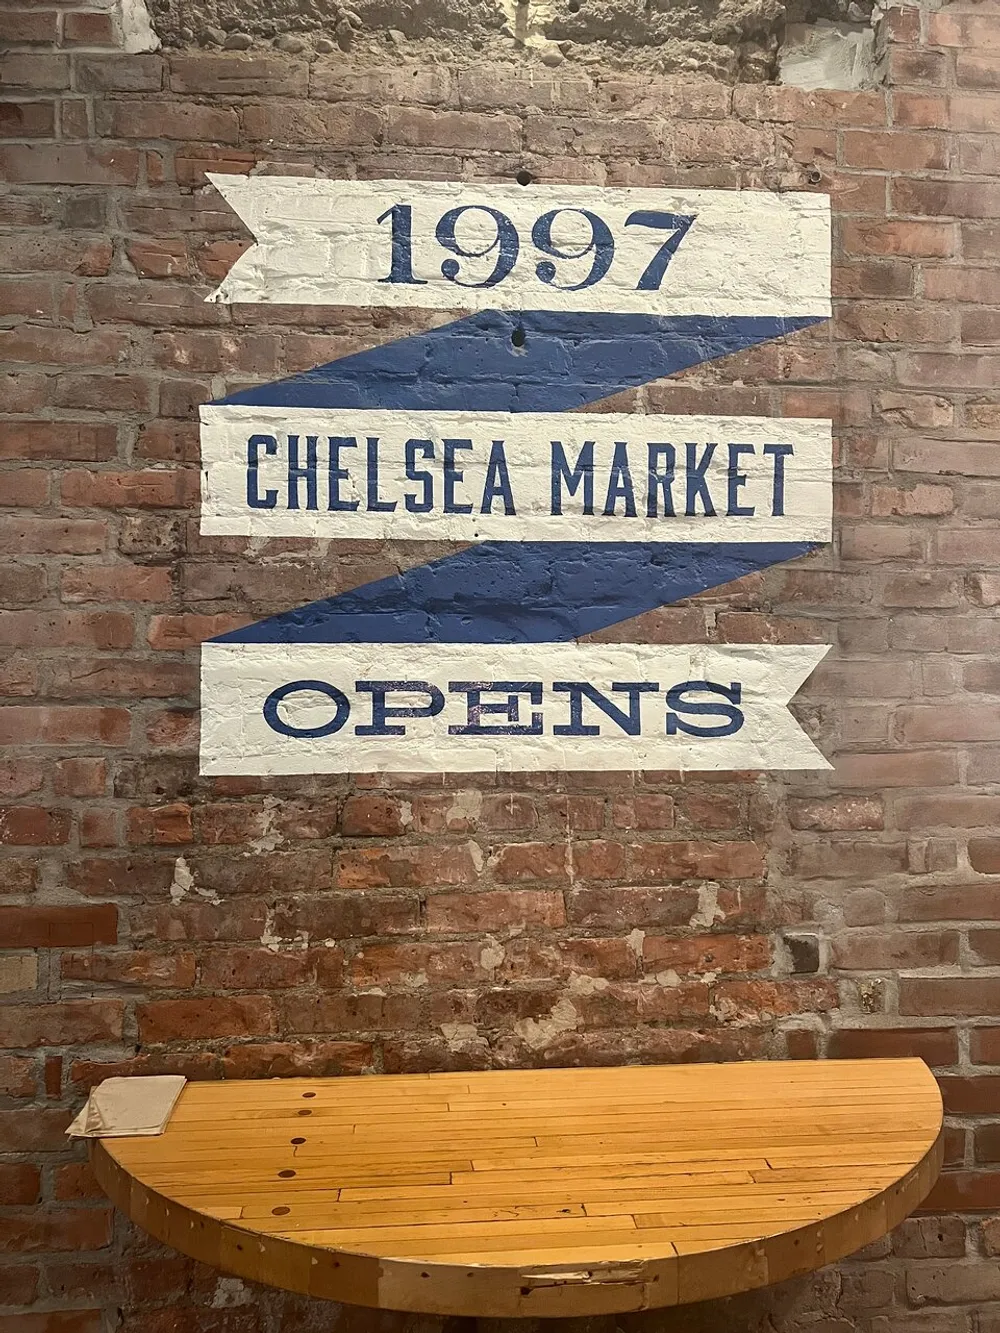 The image shows a brick wall with a painted sign that reads 1997 Chelsea Market Opens above a wooden bench indicating the opening year of the Chelsea Market